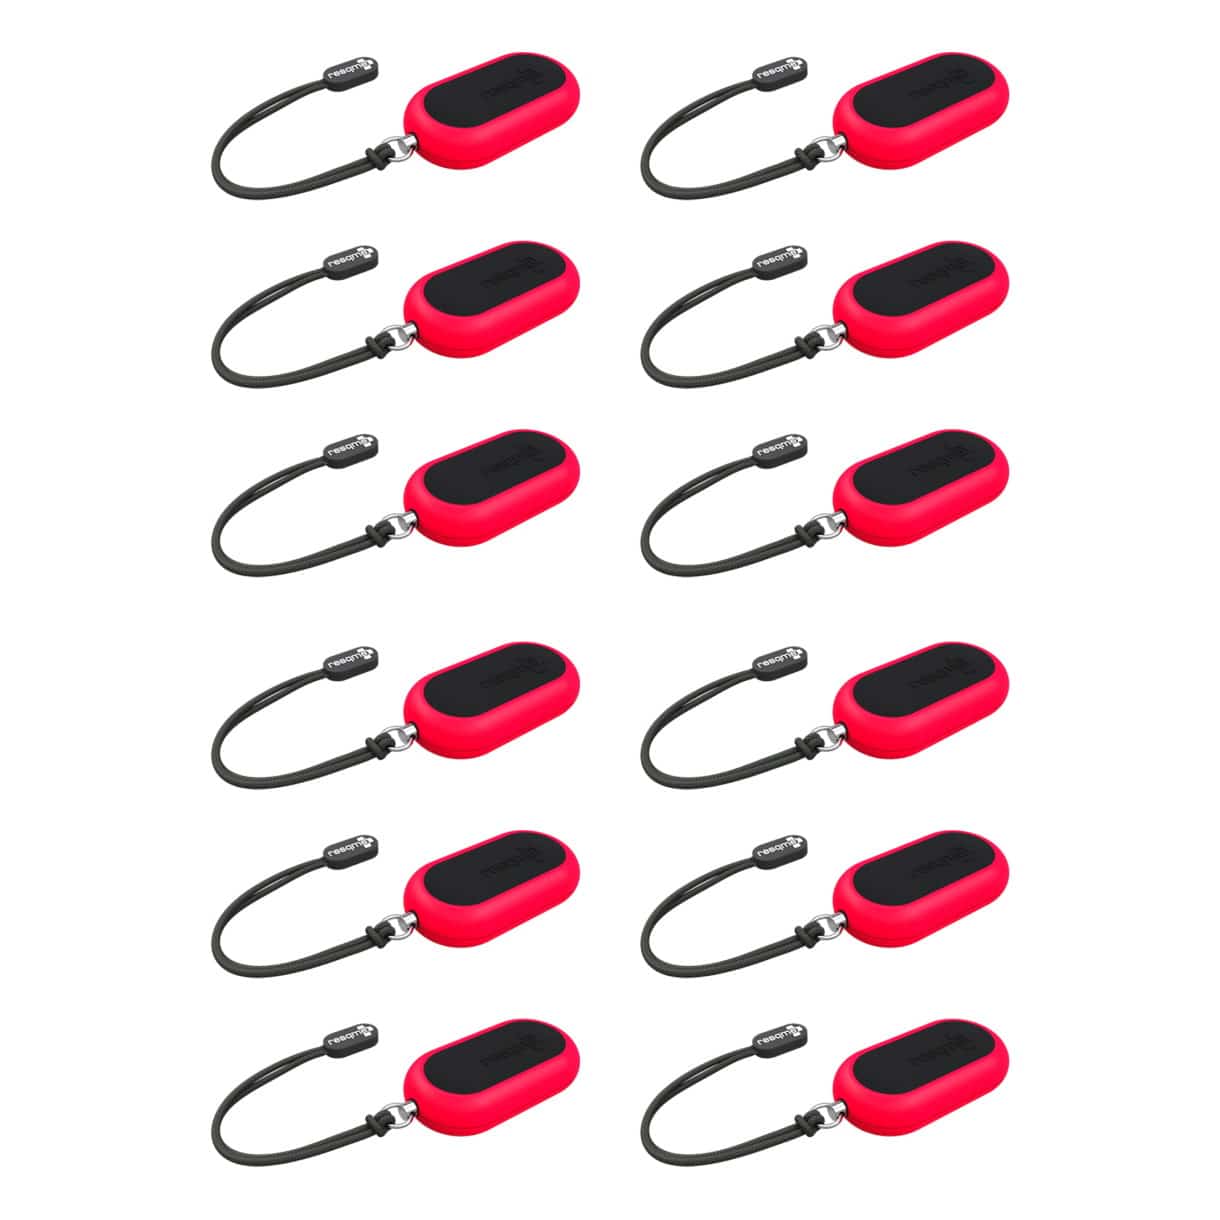 Defend-me-red-Iso-With-Cord-pack-of-12